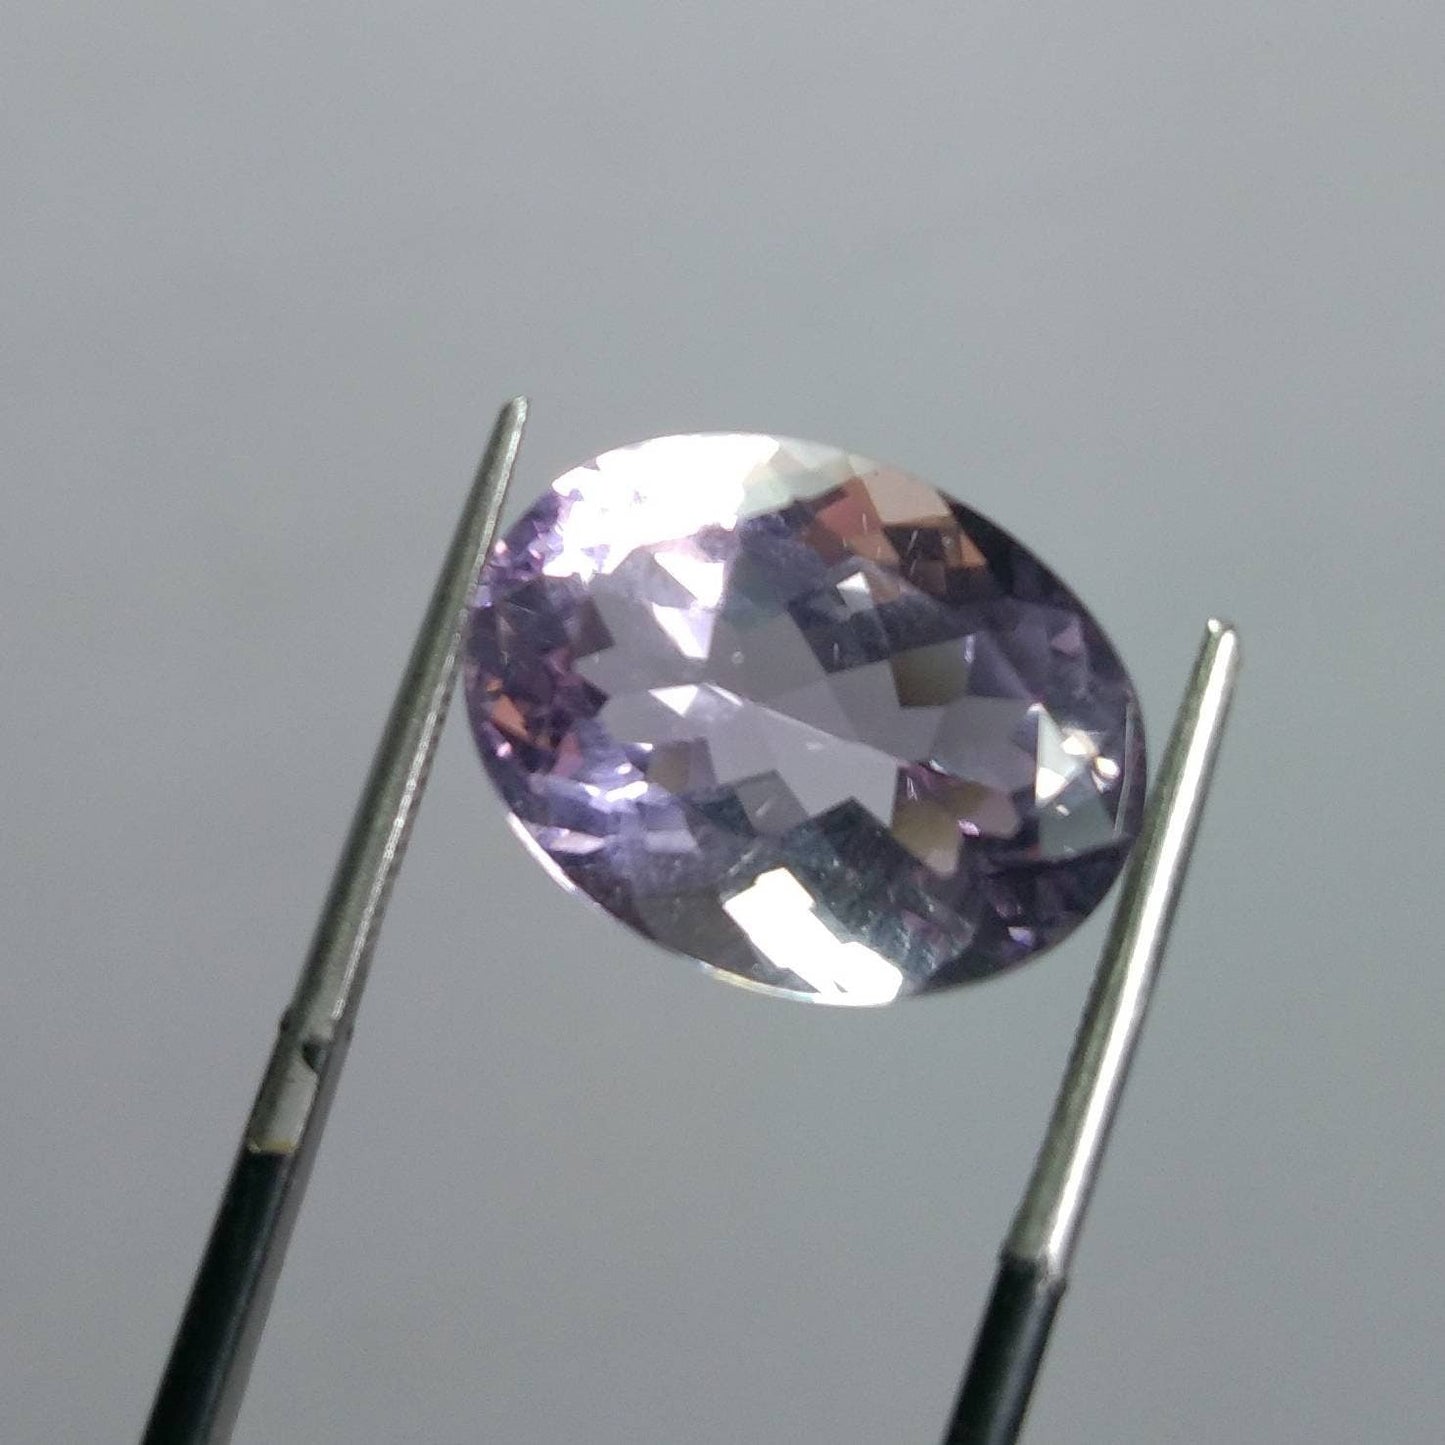 ARSAA GEMS AND MINERALSNatural fine quality beautiful 9.5 carats VV clarity faceted oval shape amethyst gem - Premium  from ARSAA GEMS AND MINERALS - Just $18.00! Shop now at ARSAA GEMS AND MINERALS